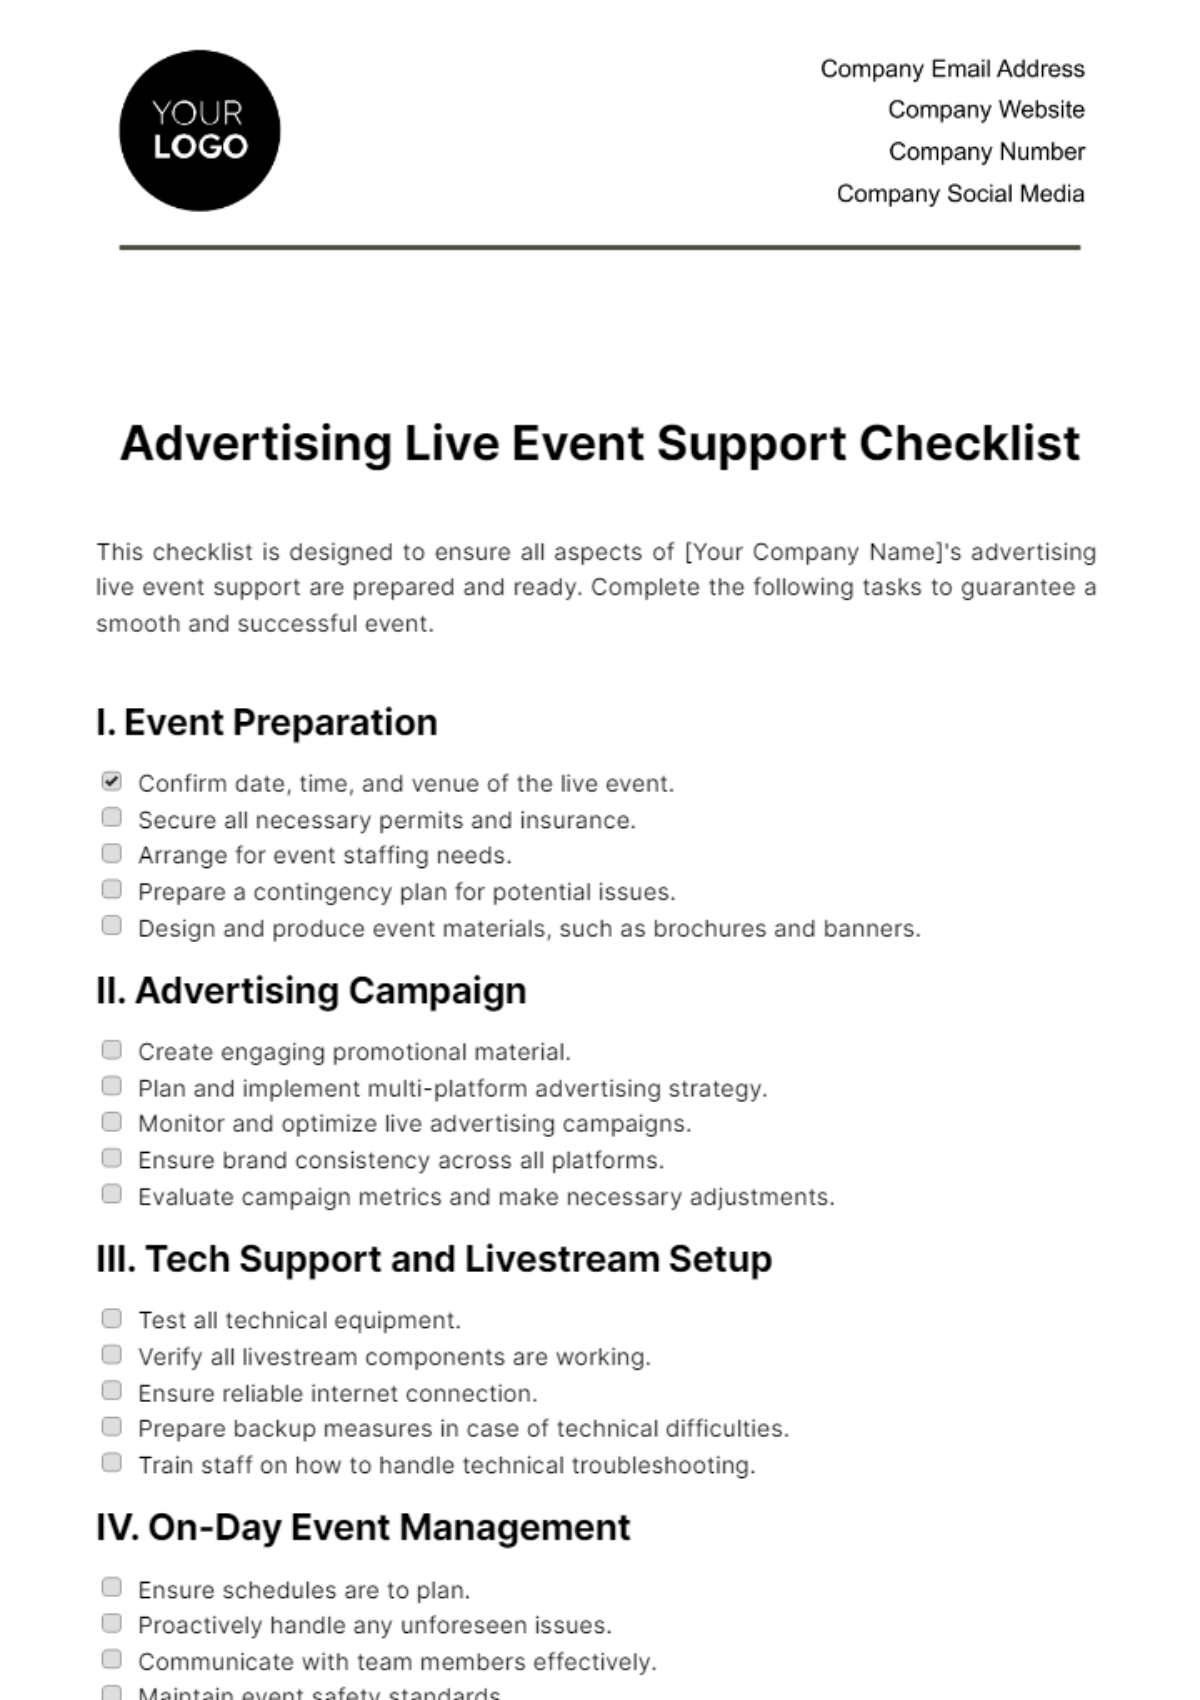 Advertising Live Event Support Checklist Template